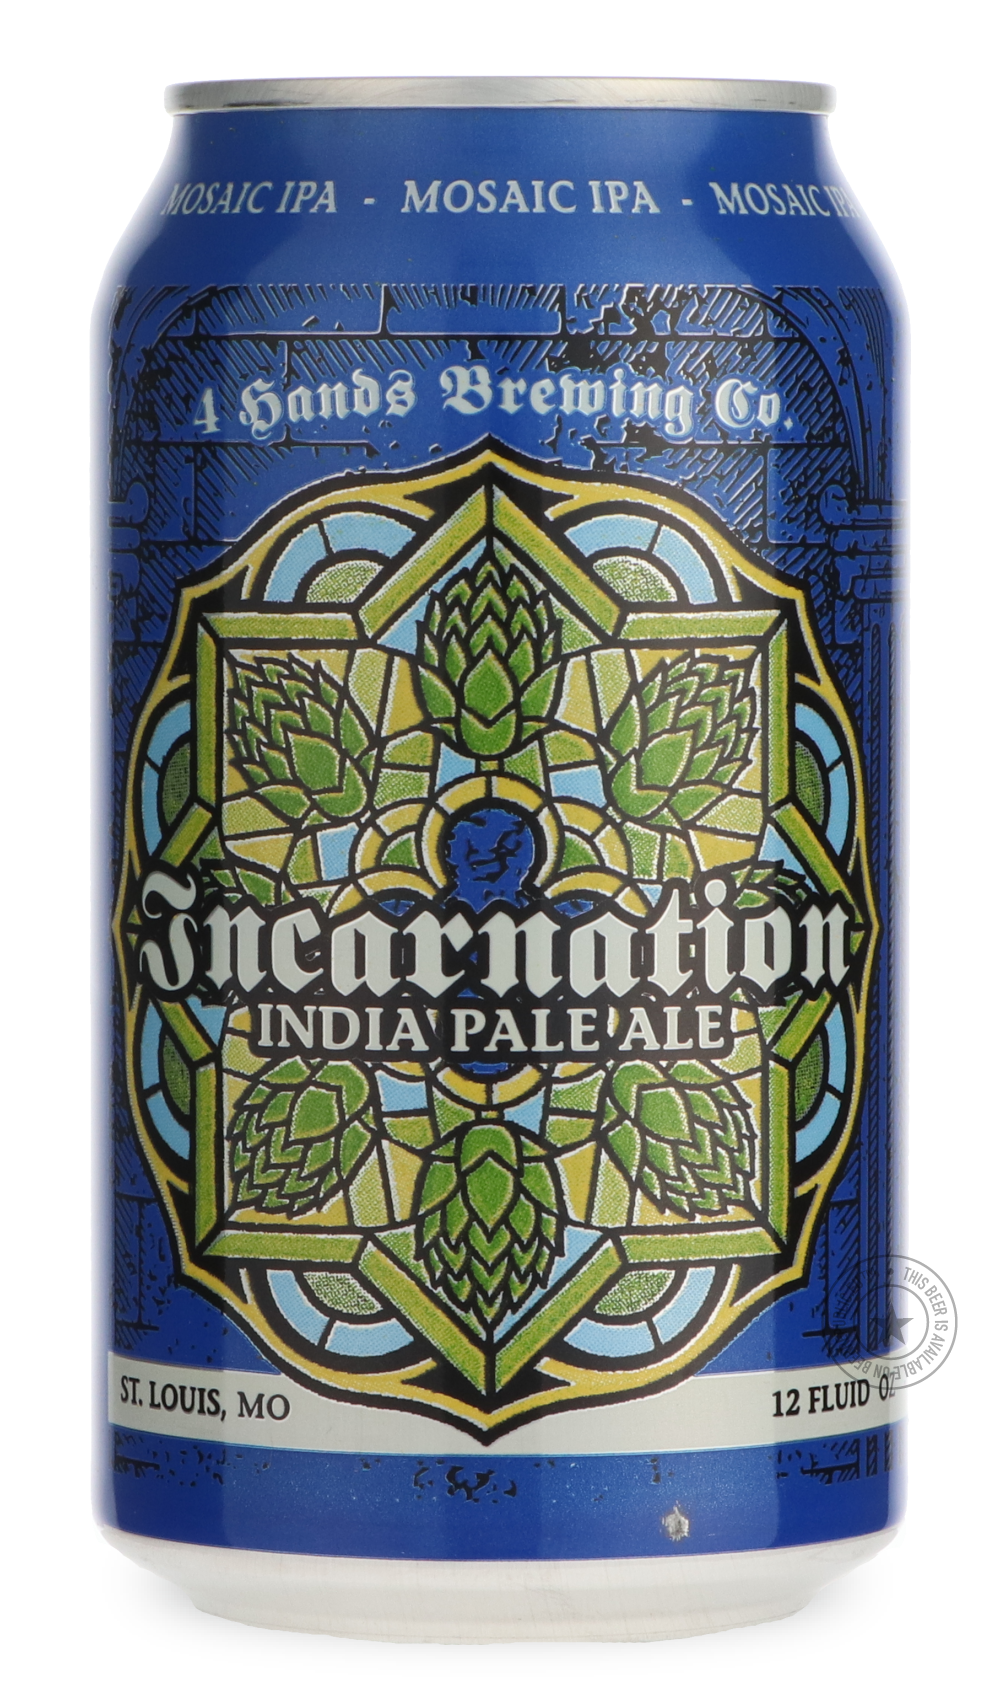 -4 Hands- Incarnation-IPA- Only @ Beer Republic - The best online beer store for American & Canadian craft beer - Buy beer online from the USA and Canada - Bier online kopen - Amerikaans bier kopen - Craft beer store - Craft beer kopen - Amerikanisch bier kaufen - Bier online kaufen - Acheter biere online - IPA - Stout - Porter - New England IPA - Hazy IPA - Imperial Stout - Barrel Aged - Barrel Aged Imperial Stout - Brown - Dark beer - Blond - Blonde - Pilsner - Lager - Wheat - Weizen - Amber - Barley Wine